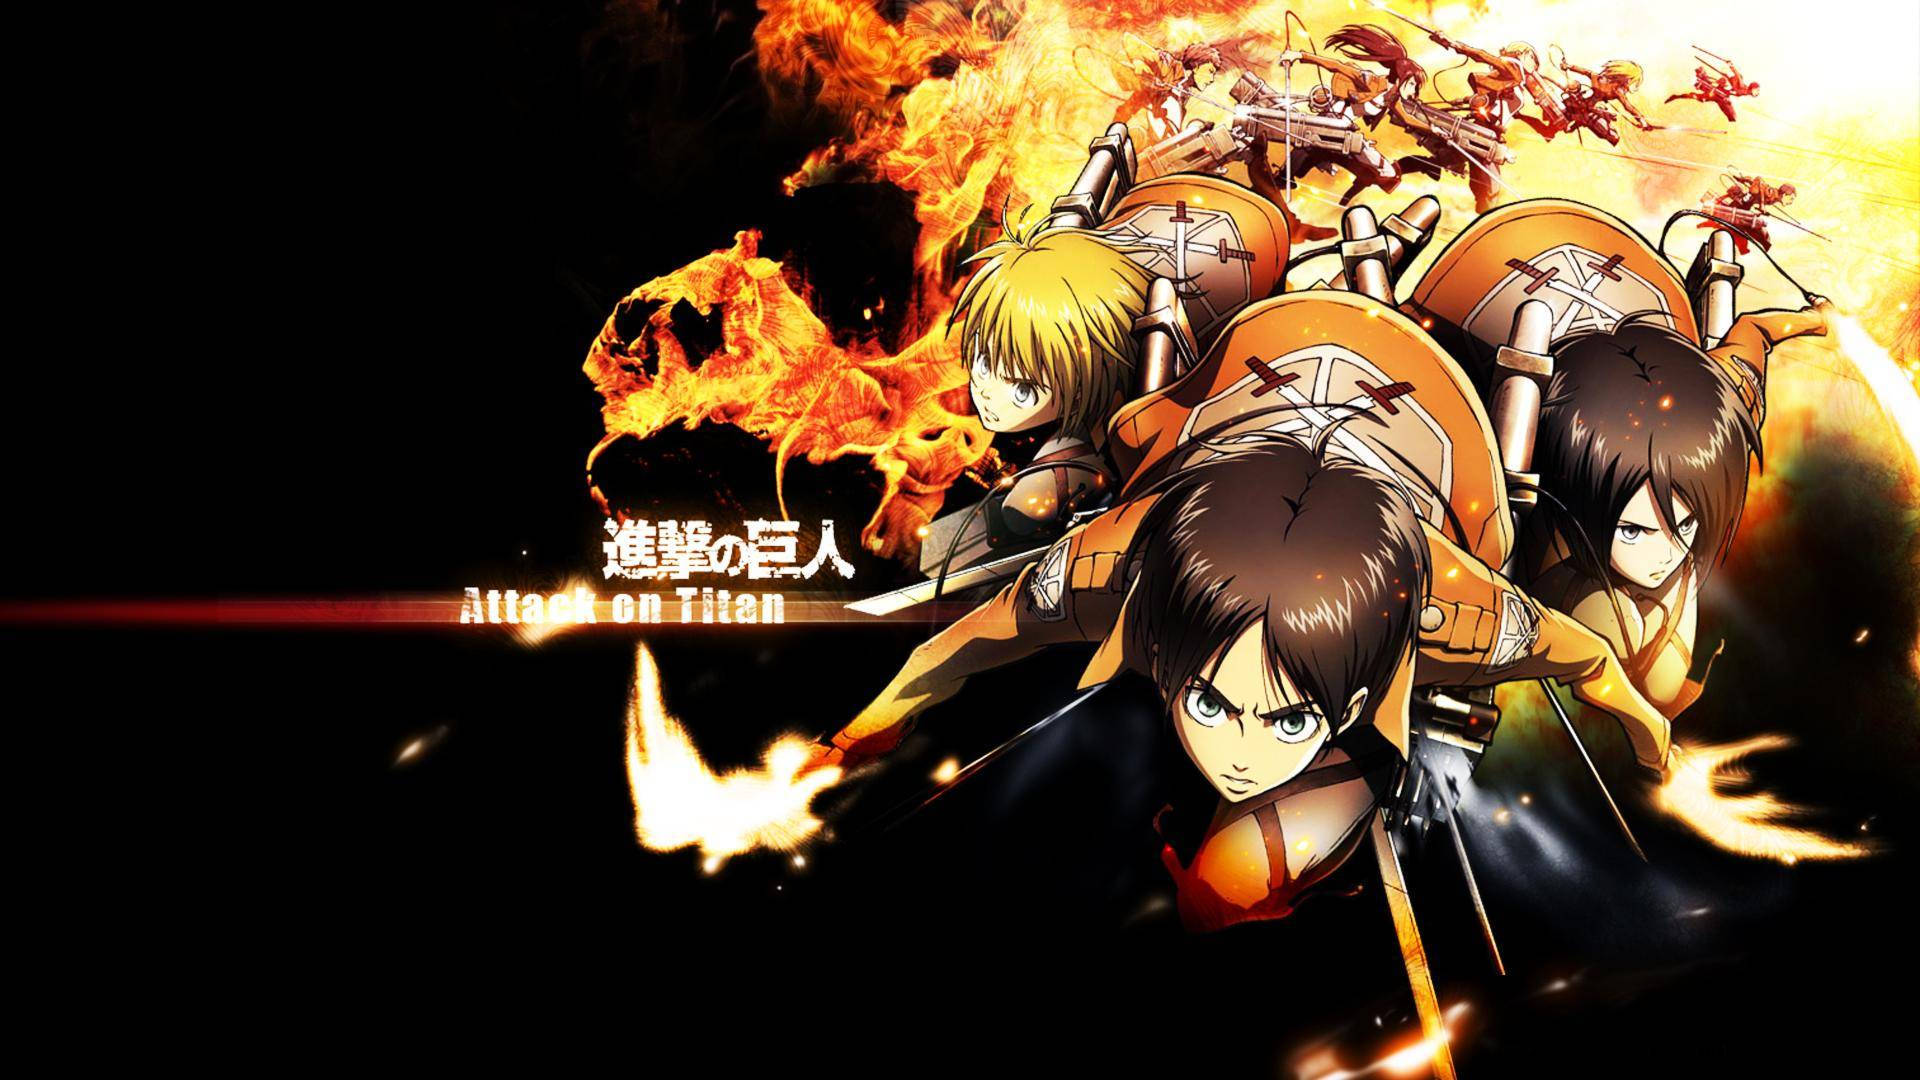 Eren, Mikasa, and Armin from Attack On Titan Anime Wallpaper